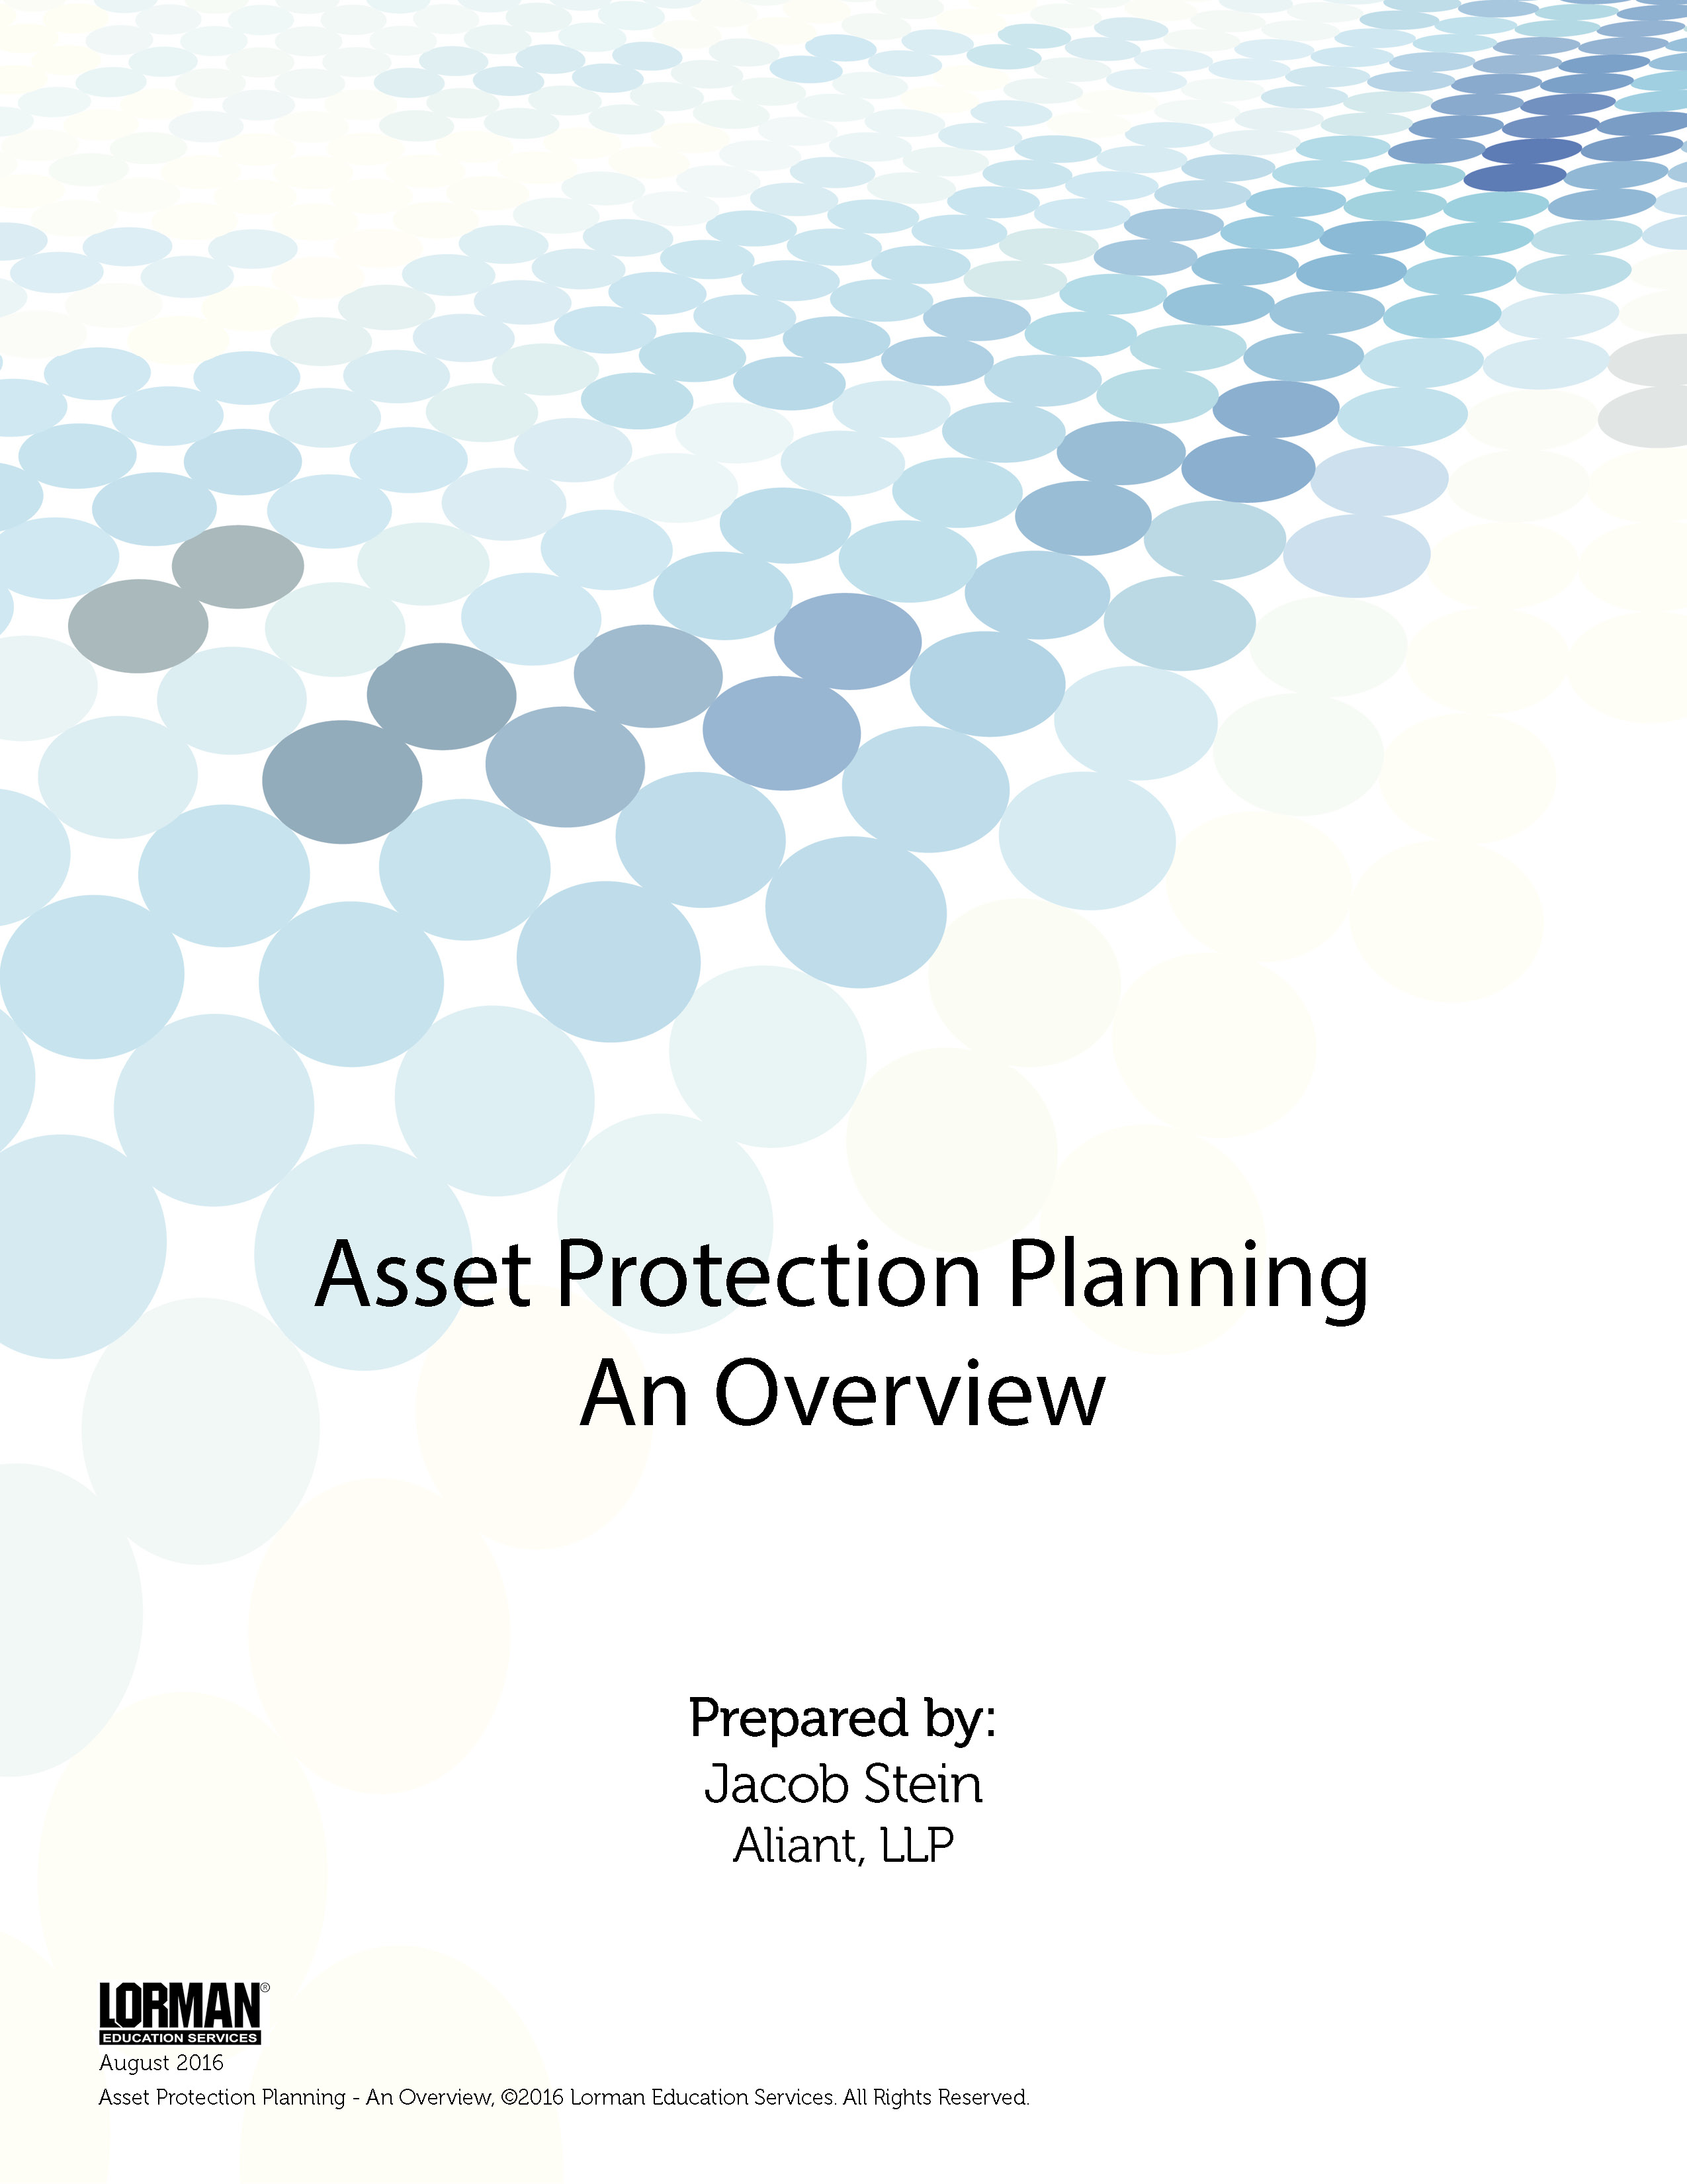 Asset Protection Planning - An Overview